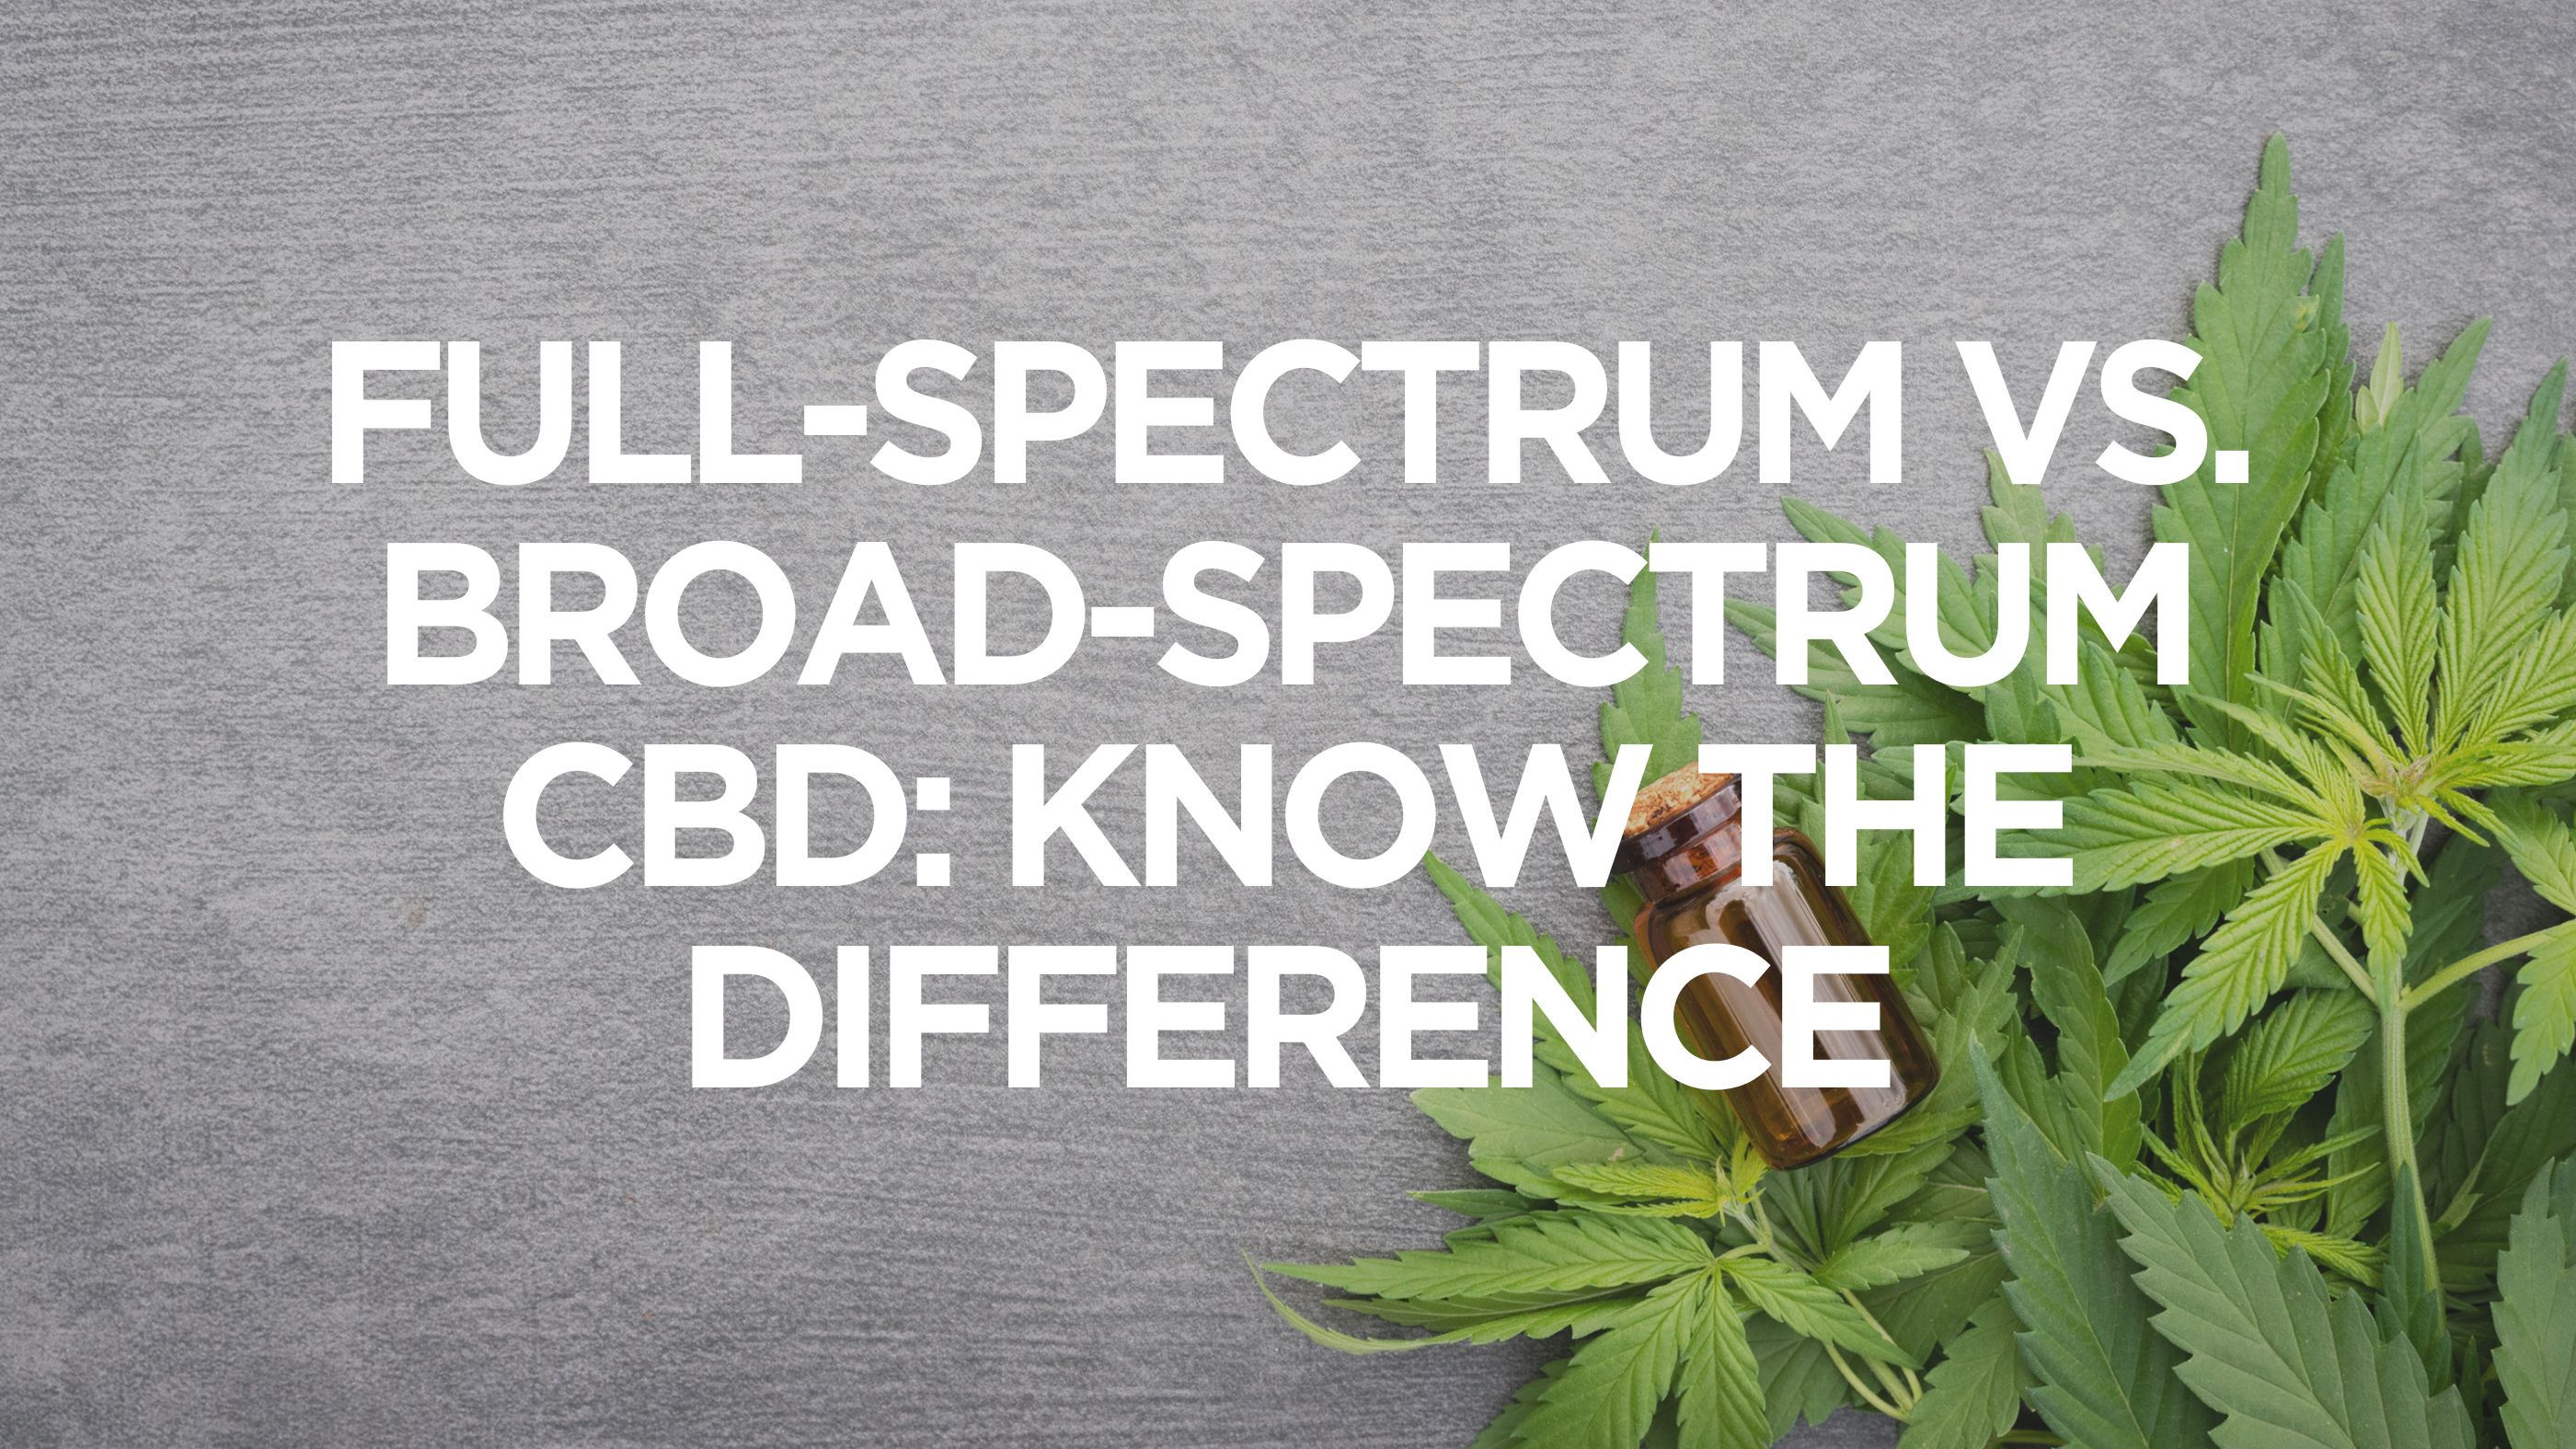 Full-Spectrum vs. Broad-Spectrum CBD: Know the Difference